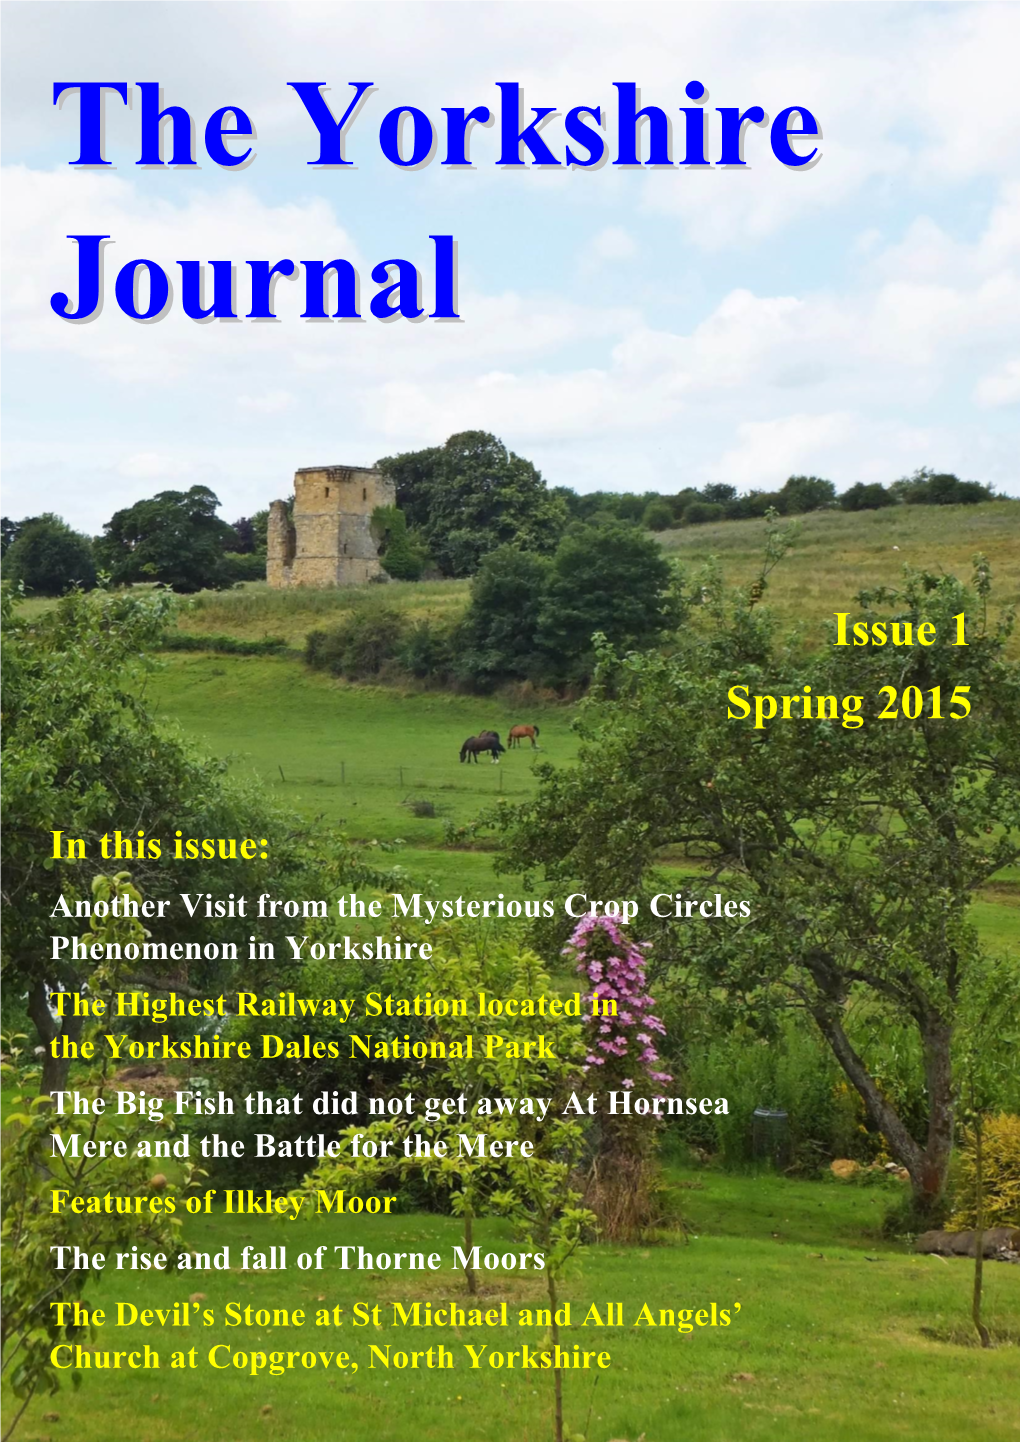 Issue 1 Spring 2015